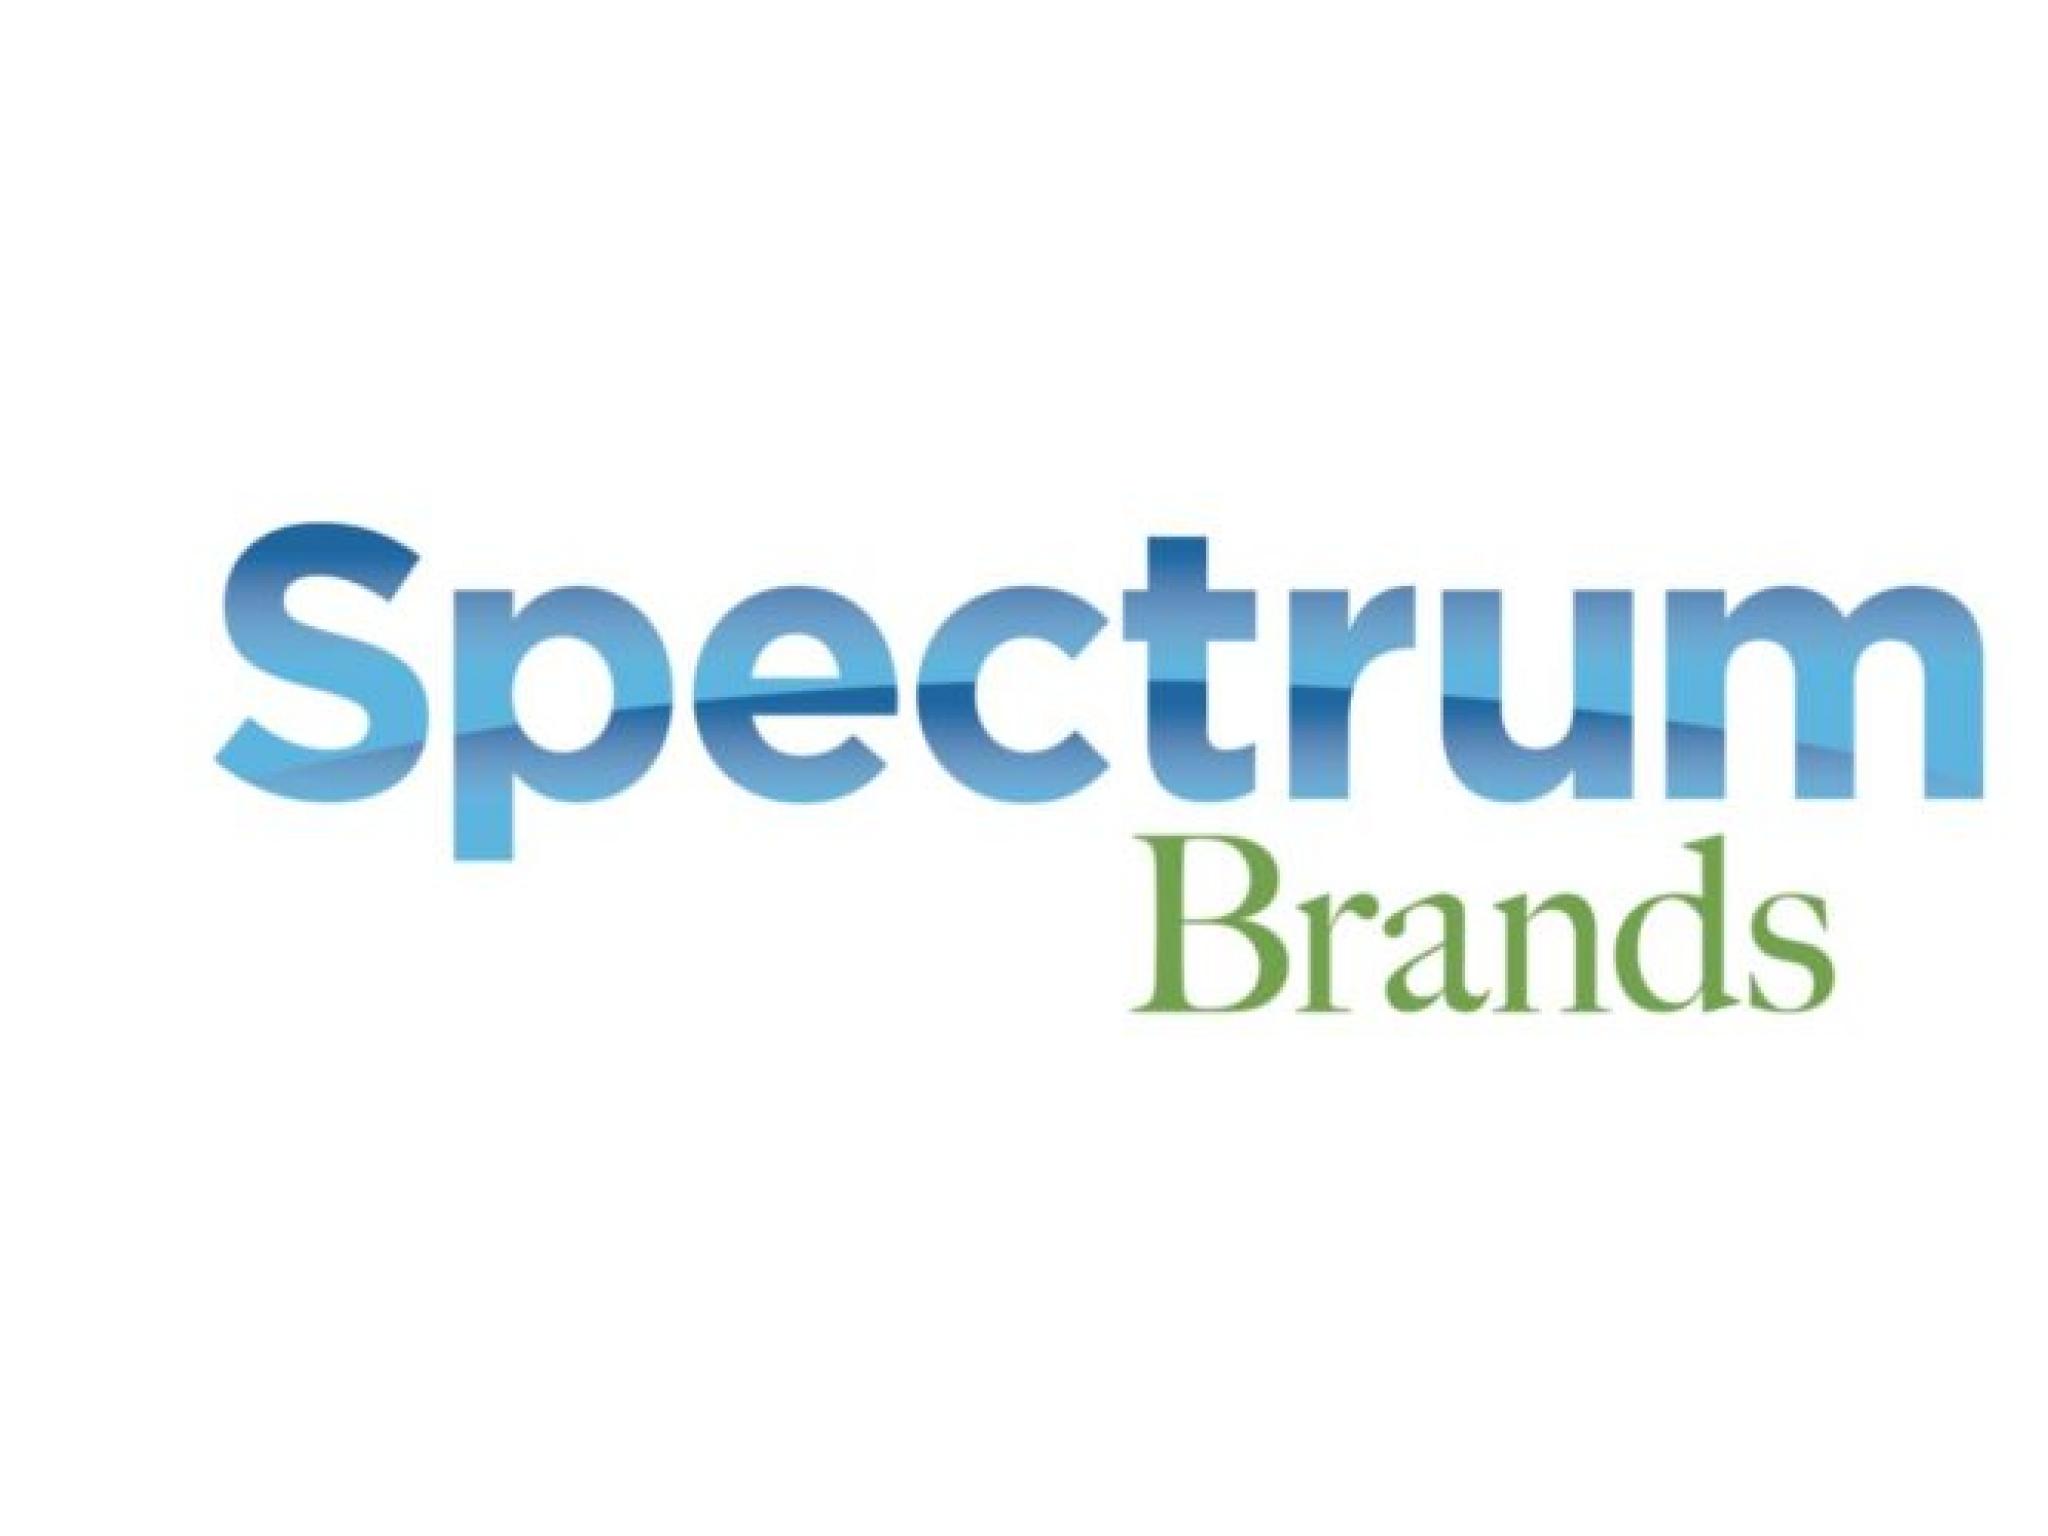  spectrum-brands-posts-upbeat-results-joins-aersale-sinclair-icu-medical-and-other-big-stocks-moving-higher-on-thursday 